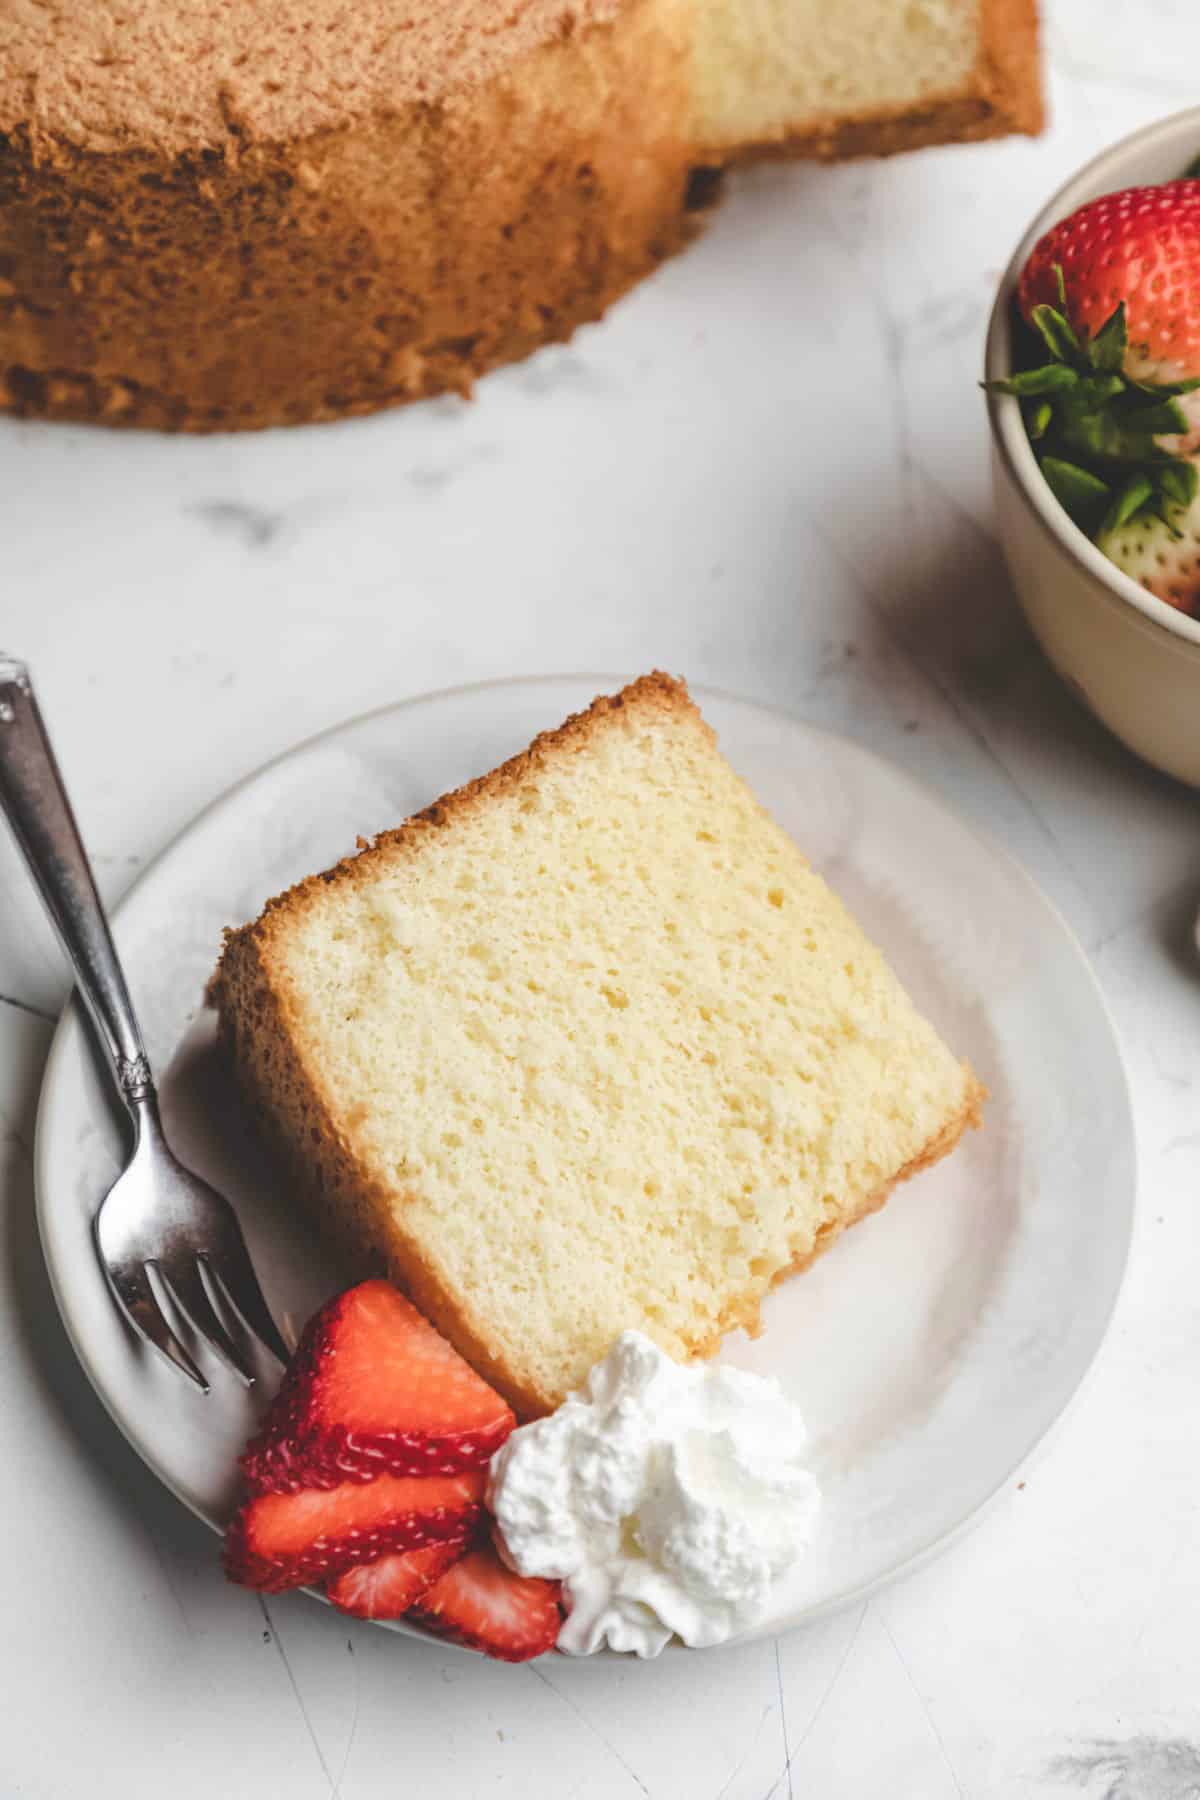 A slice of chiffon cake next to sliced strawberries and whipped cream on a white plate.